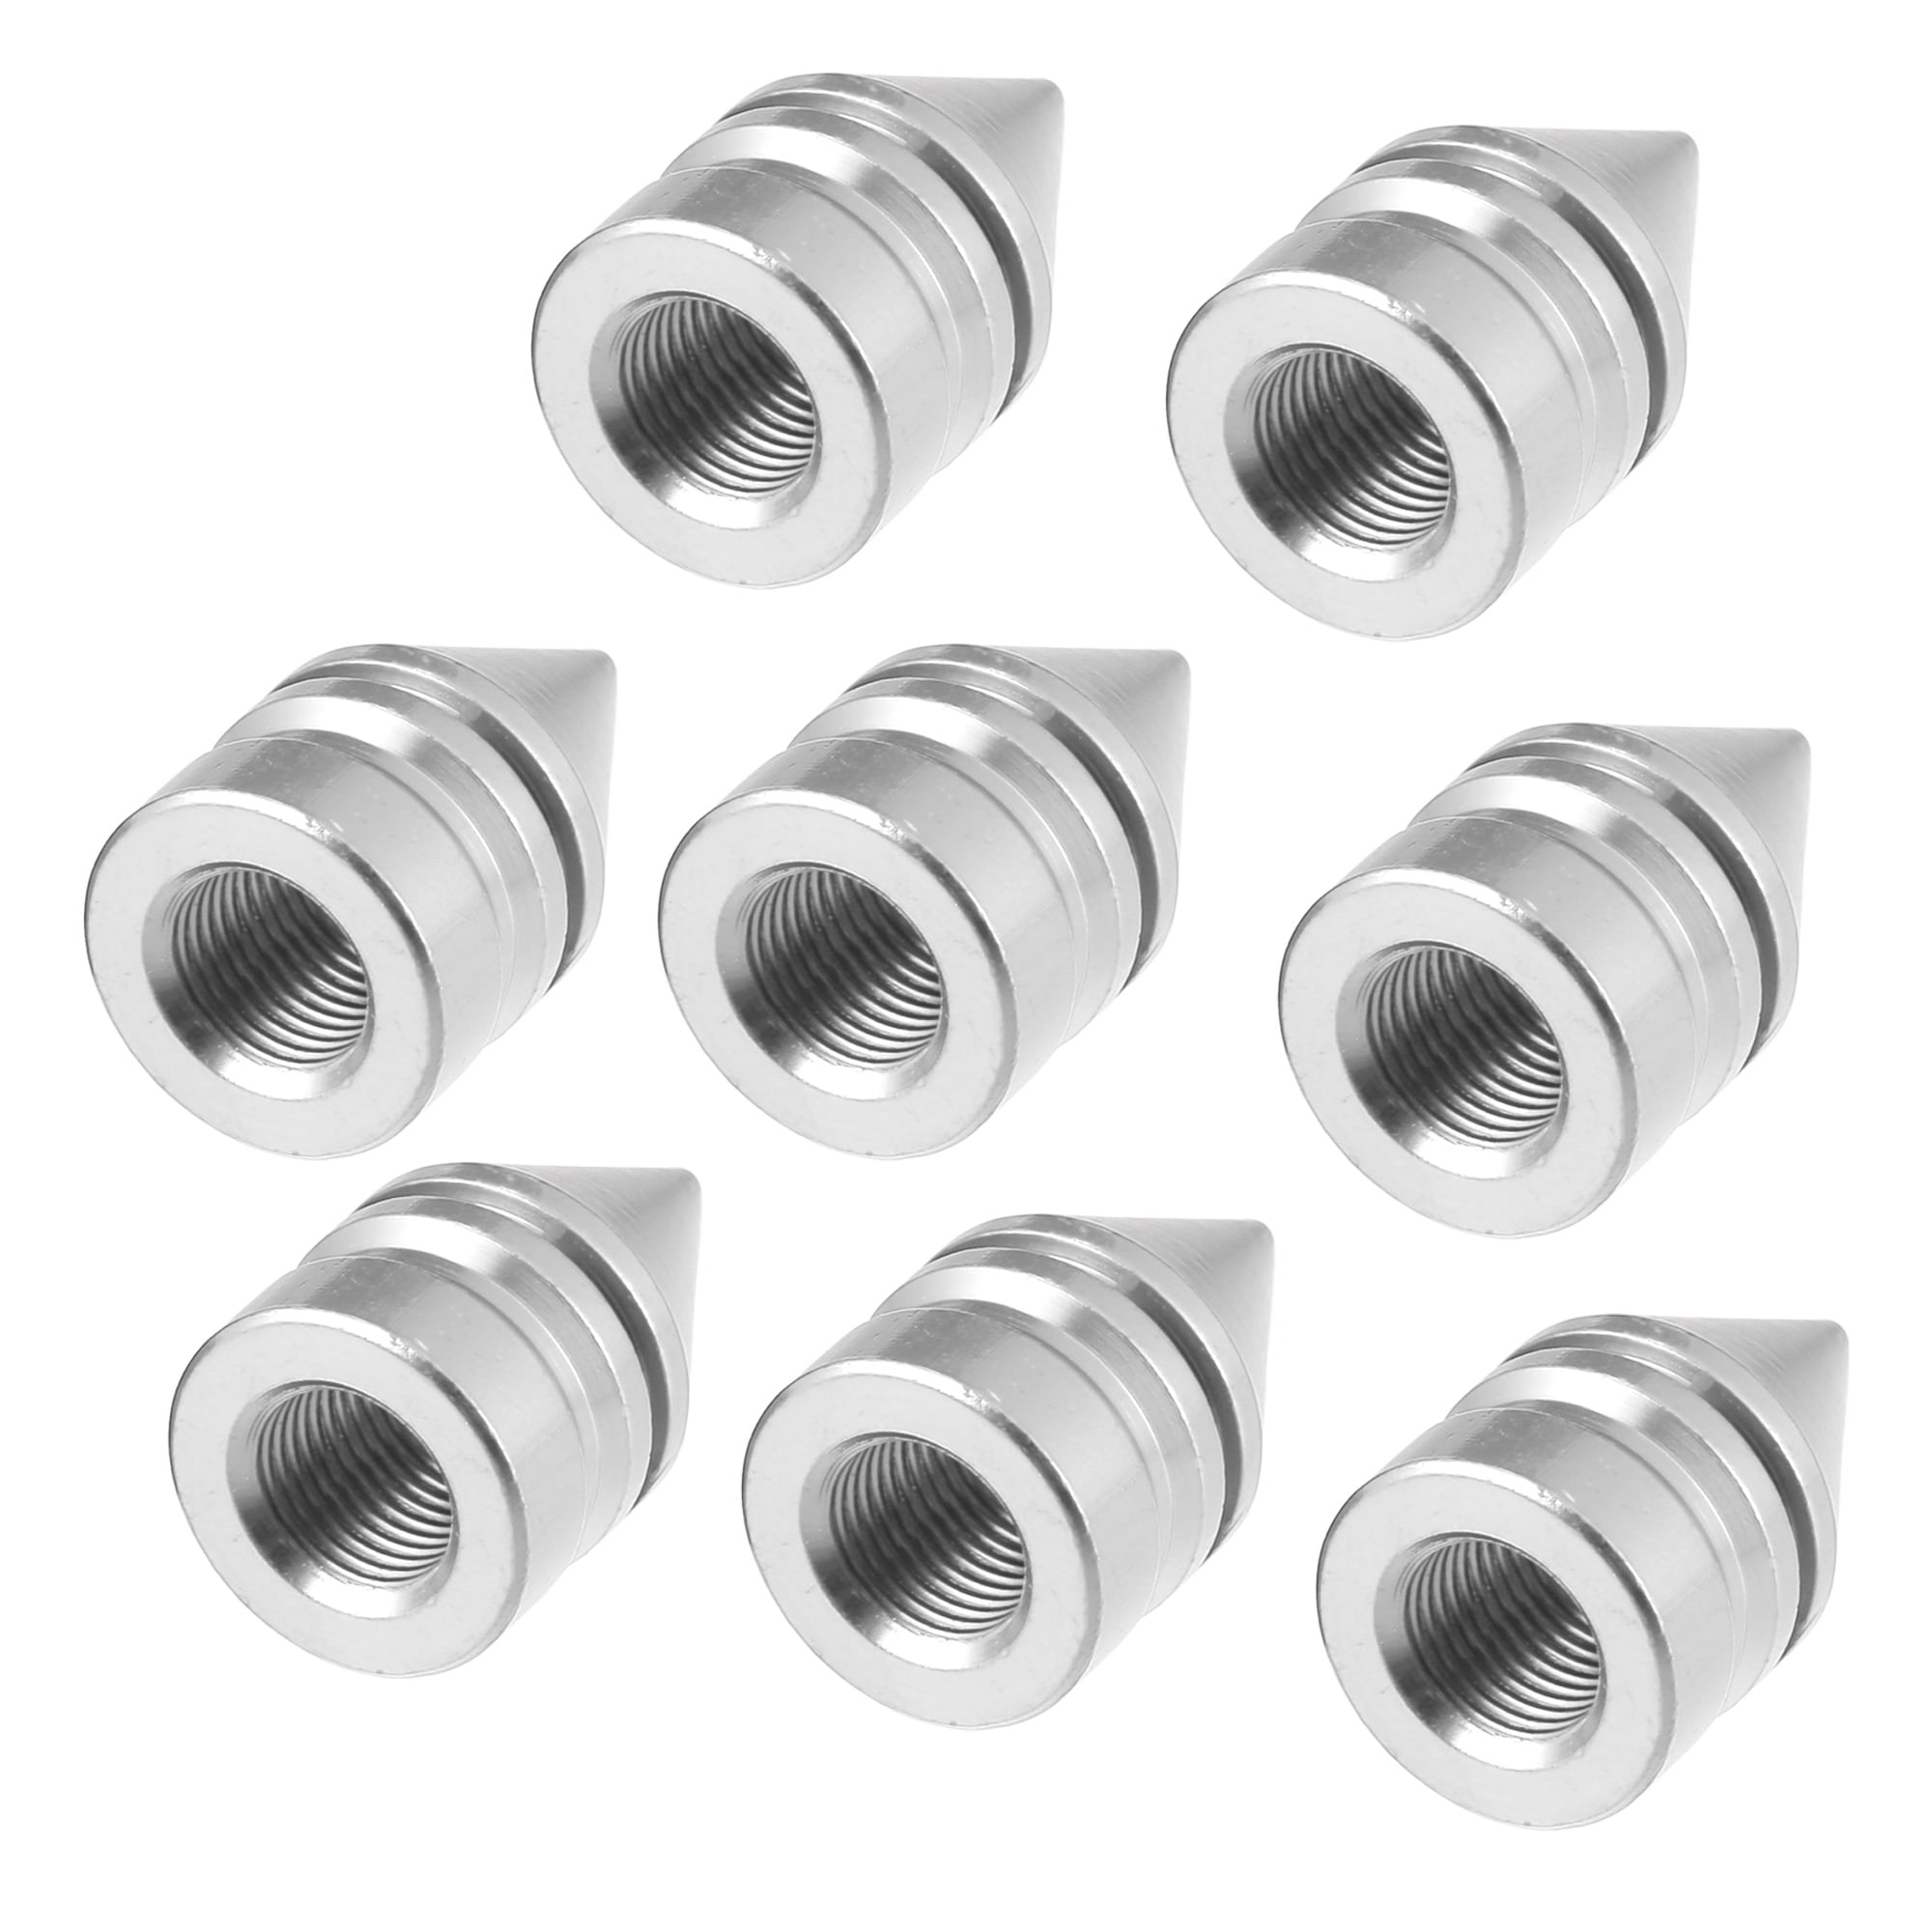 Universal Fit for Most Vehicles 45mm Anodized Aluminum Valve Stem Caps Silver Spiked Head Design Car Accessories Pack of 4 